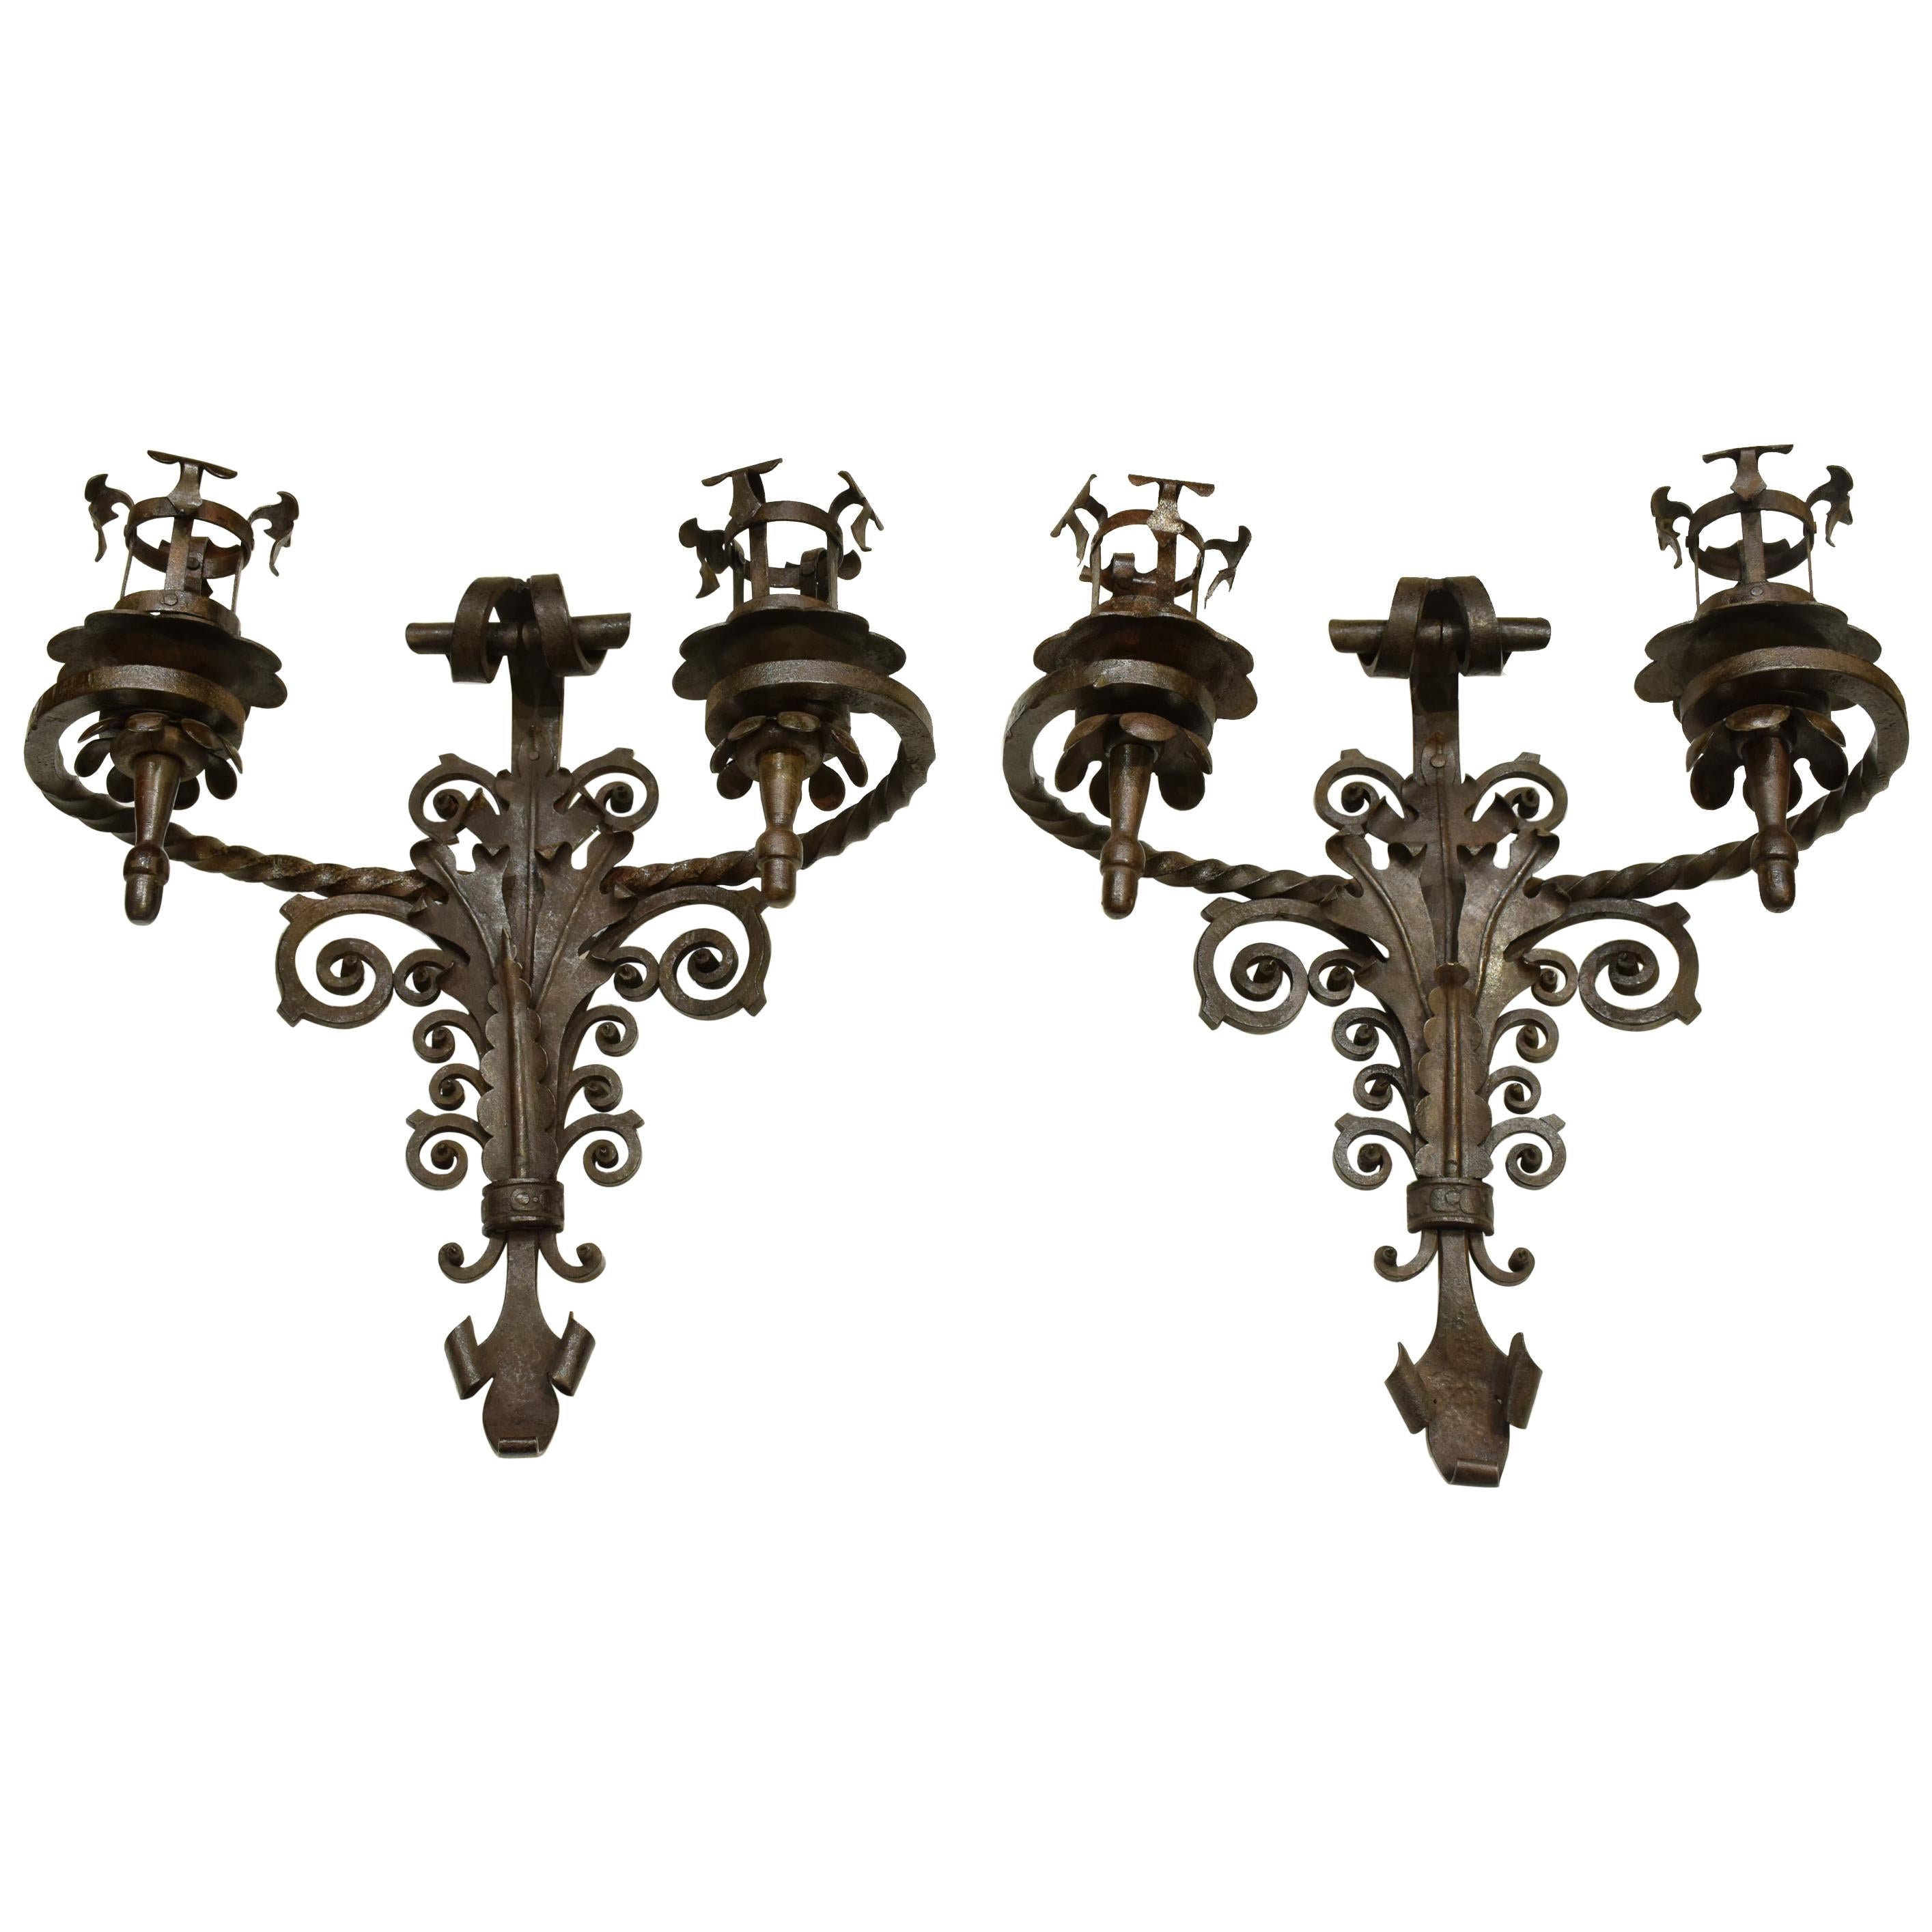 Pair of Wrought Iron Sconces with Double Candle Holders Black, Late 19th Century